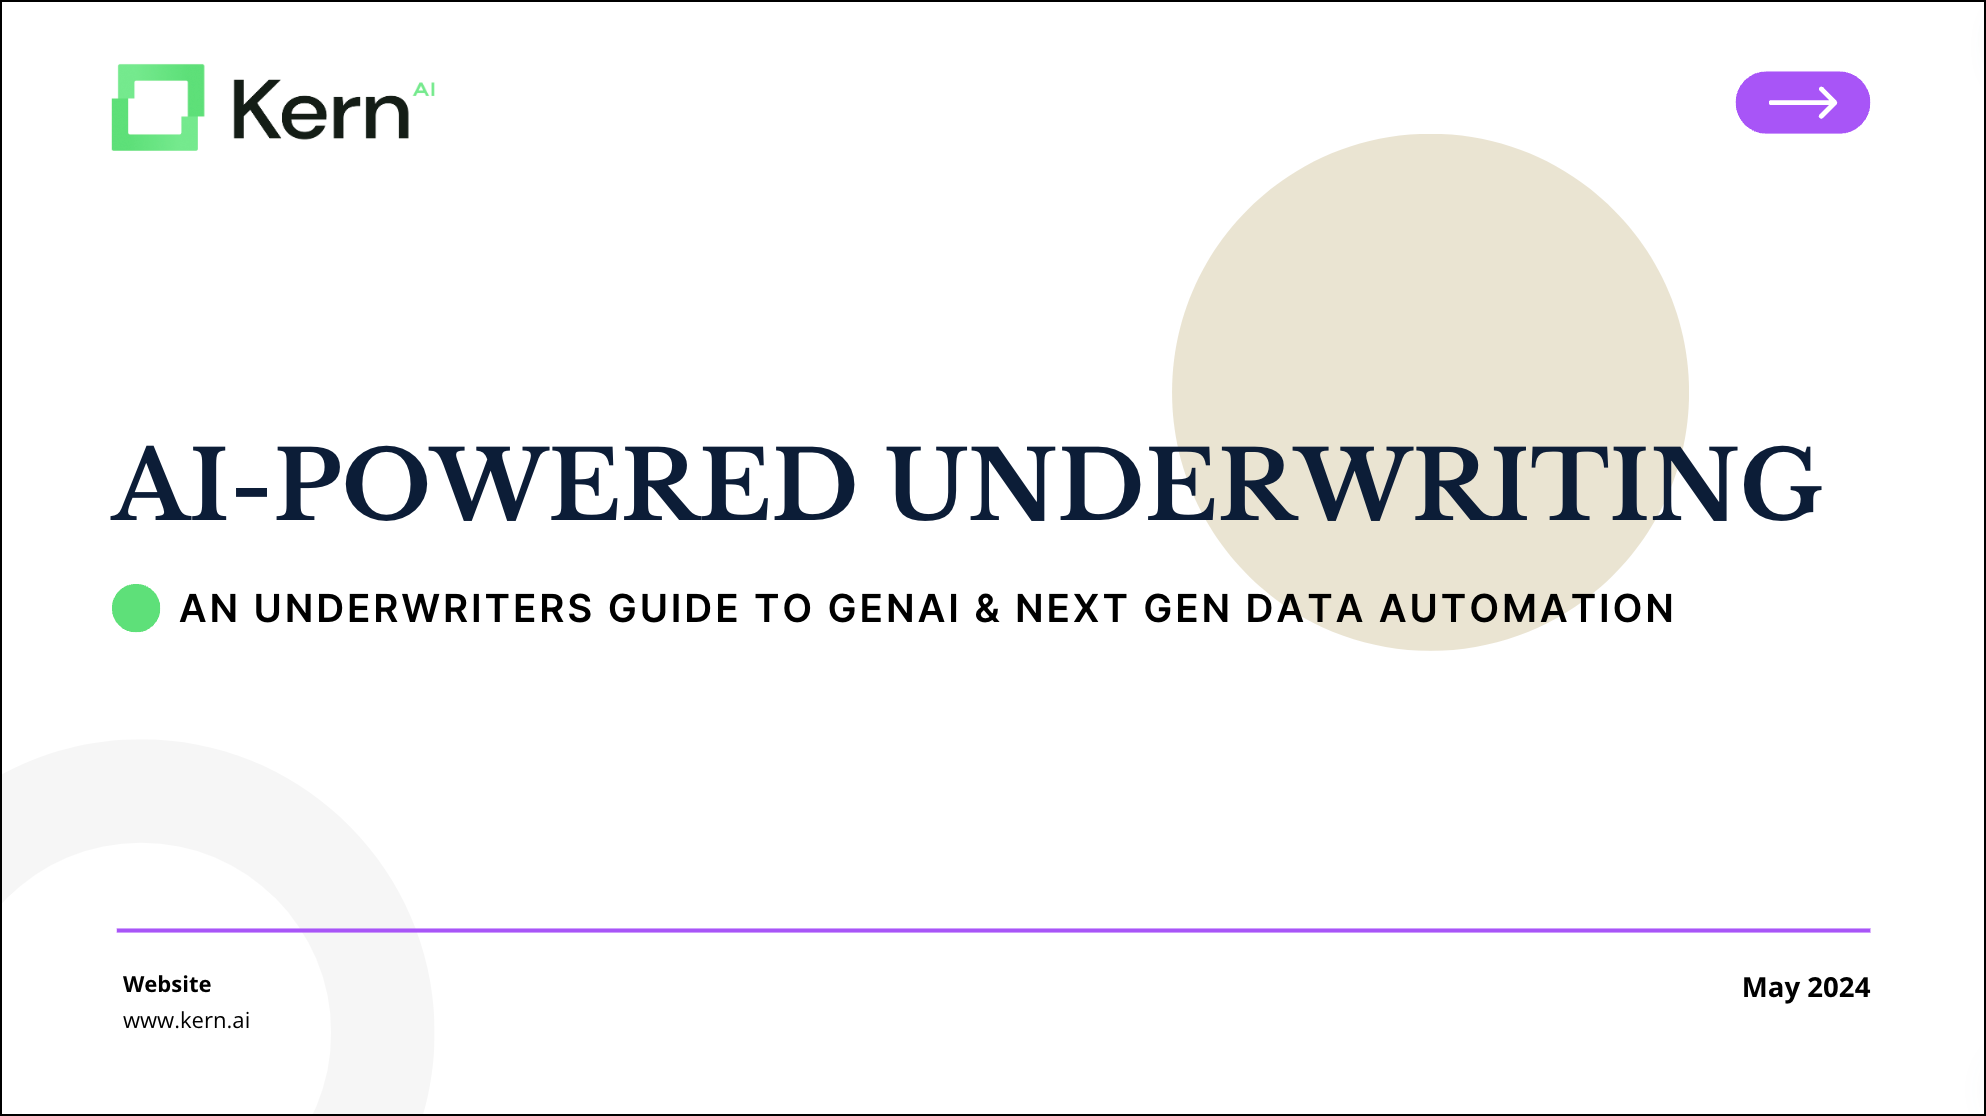 An Underwriters guide to GenAI